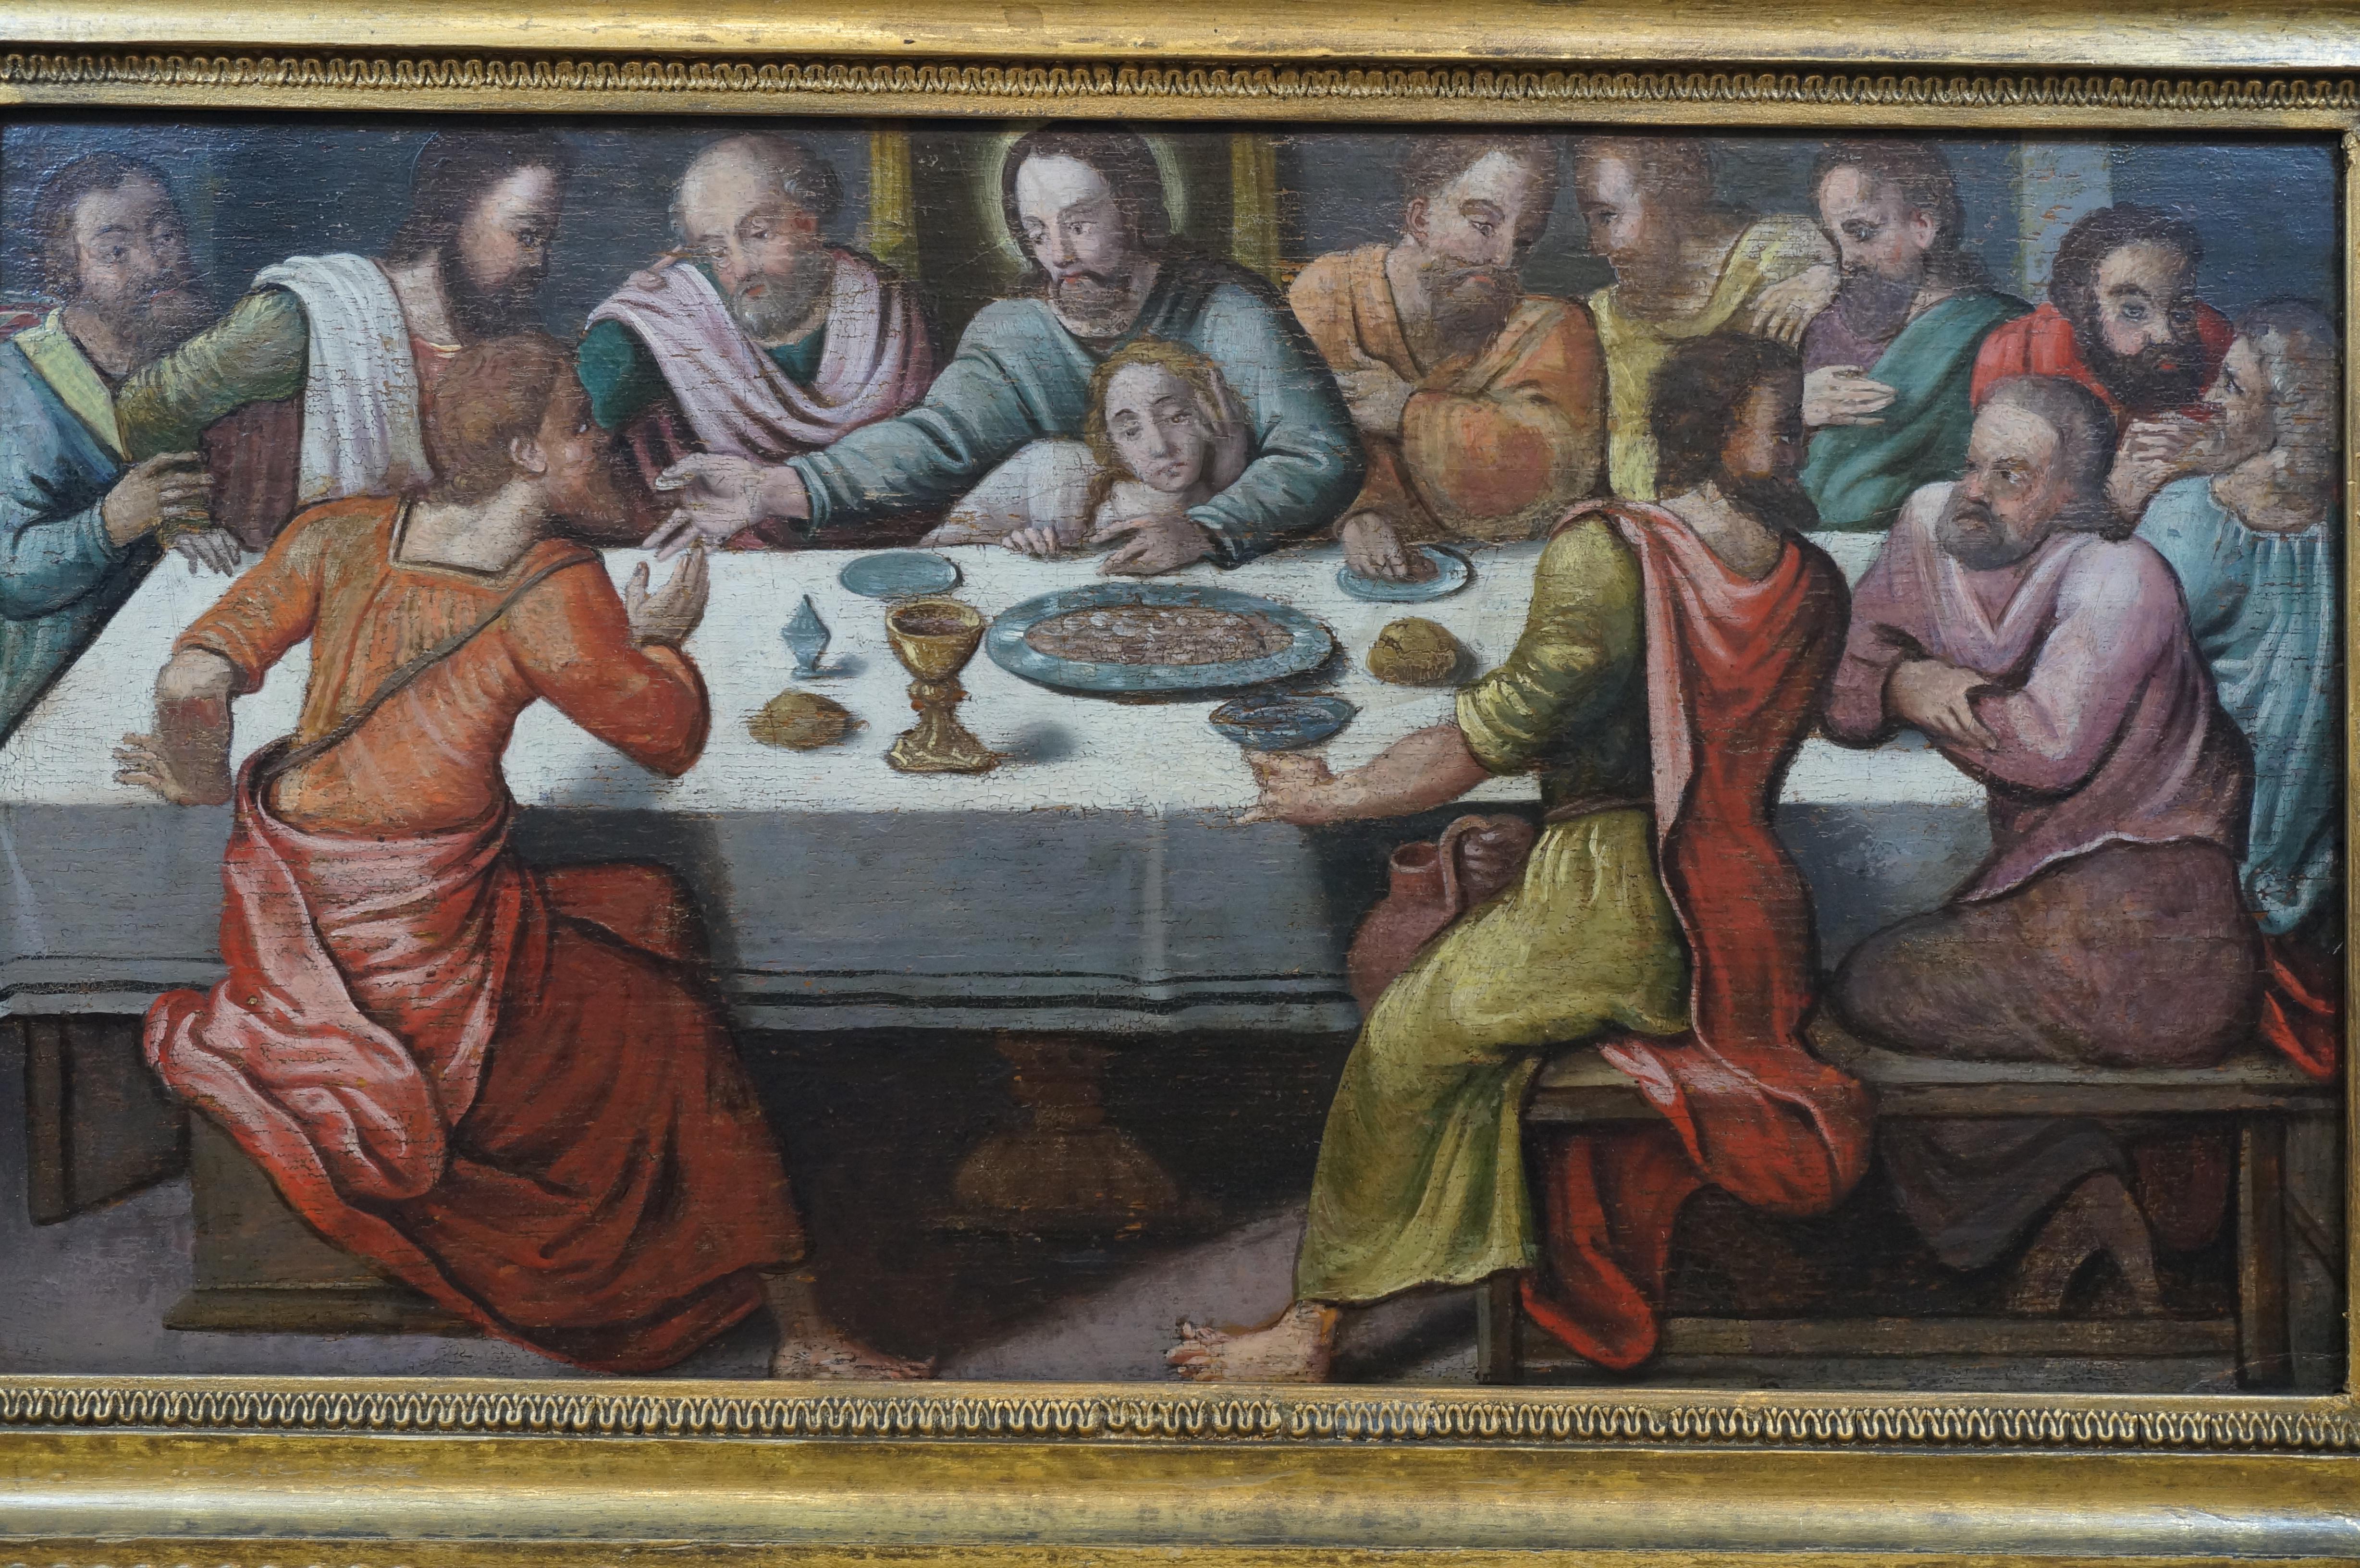 Archaic paiting of the Last Supper. Jezus surrounded by his twelve apostels seated around a table with a dish with a roasted lamb, a chalice in gothic style and pieces of bread.

The position of Saint John - in front of Jezus and resting upon his